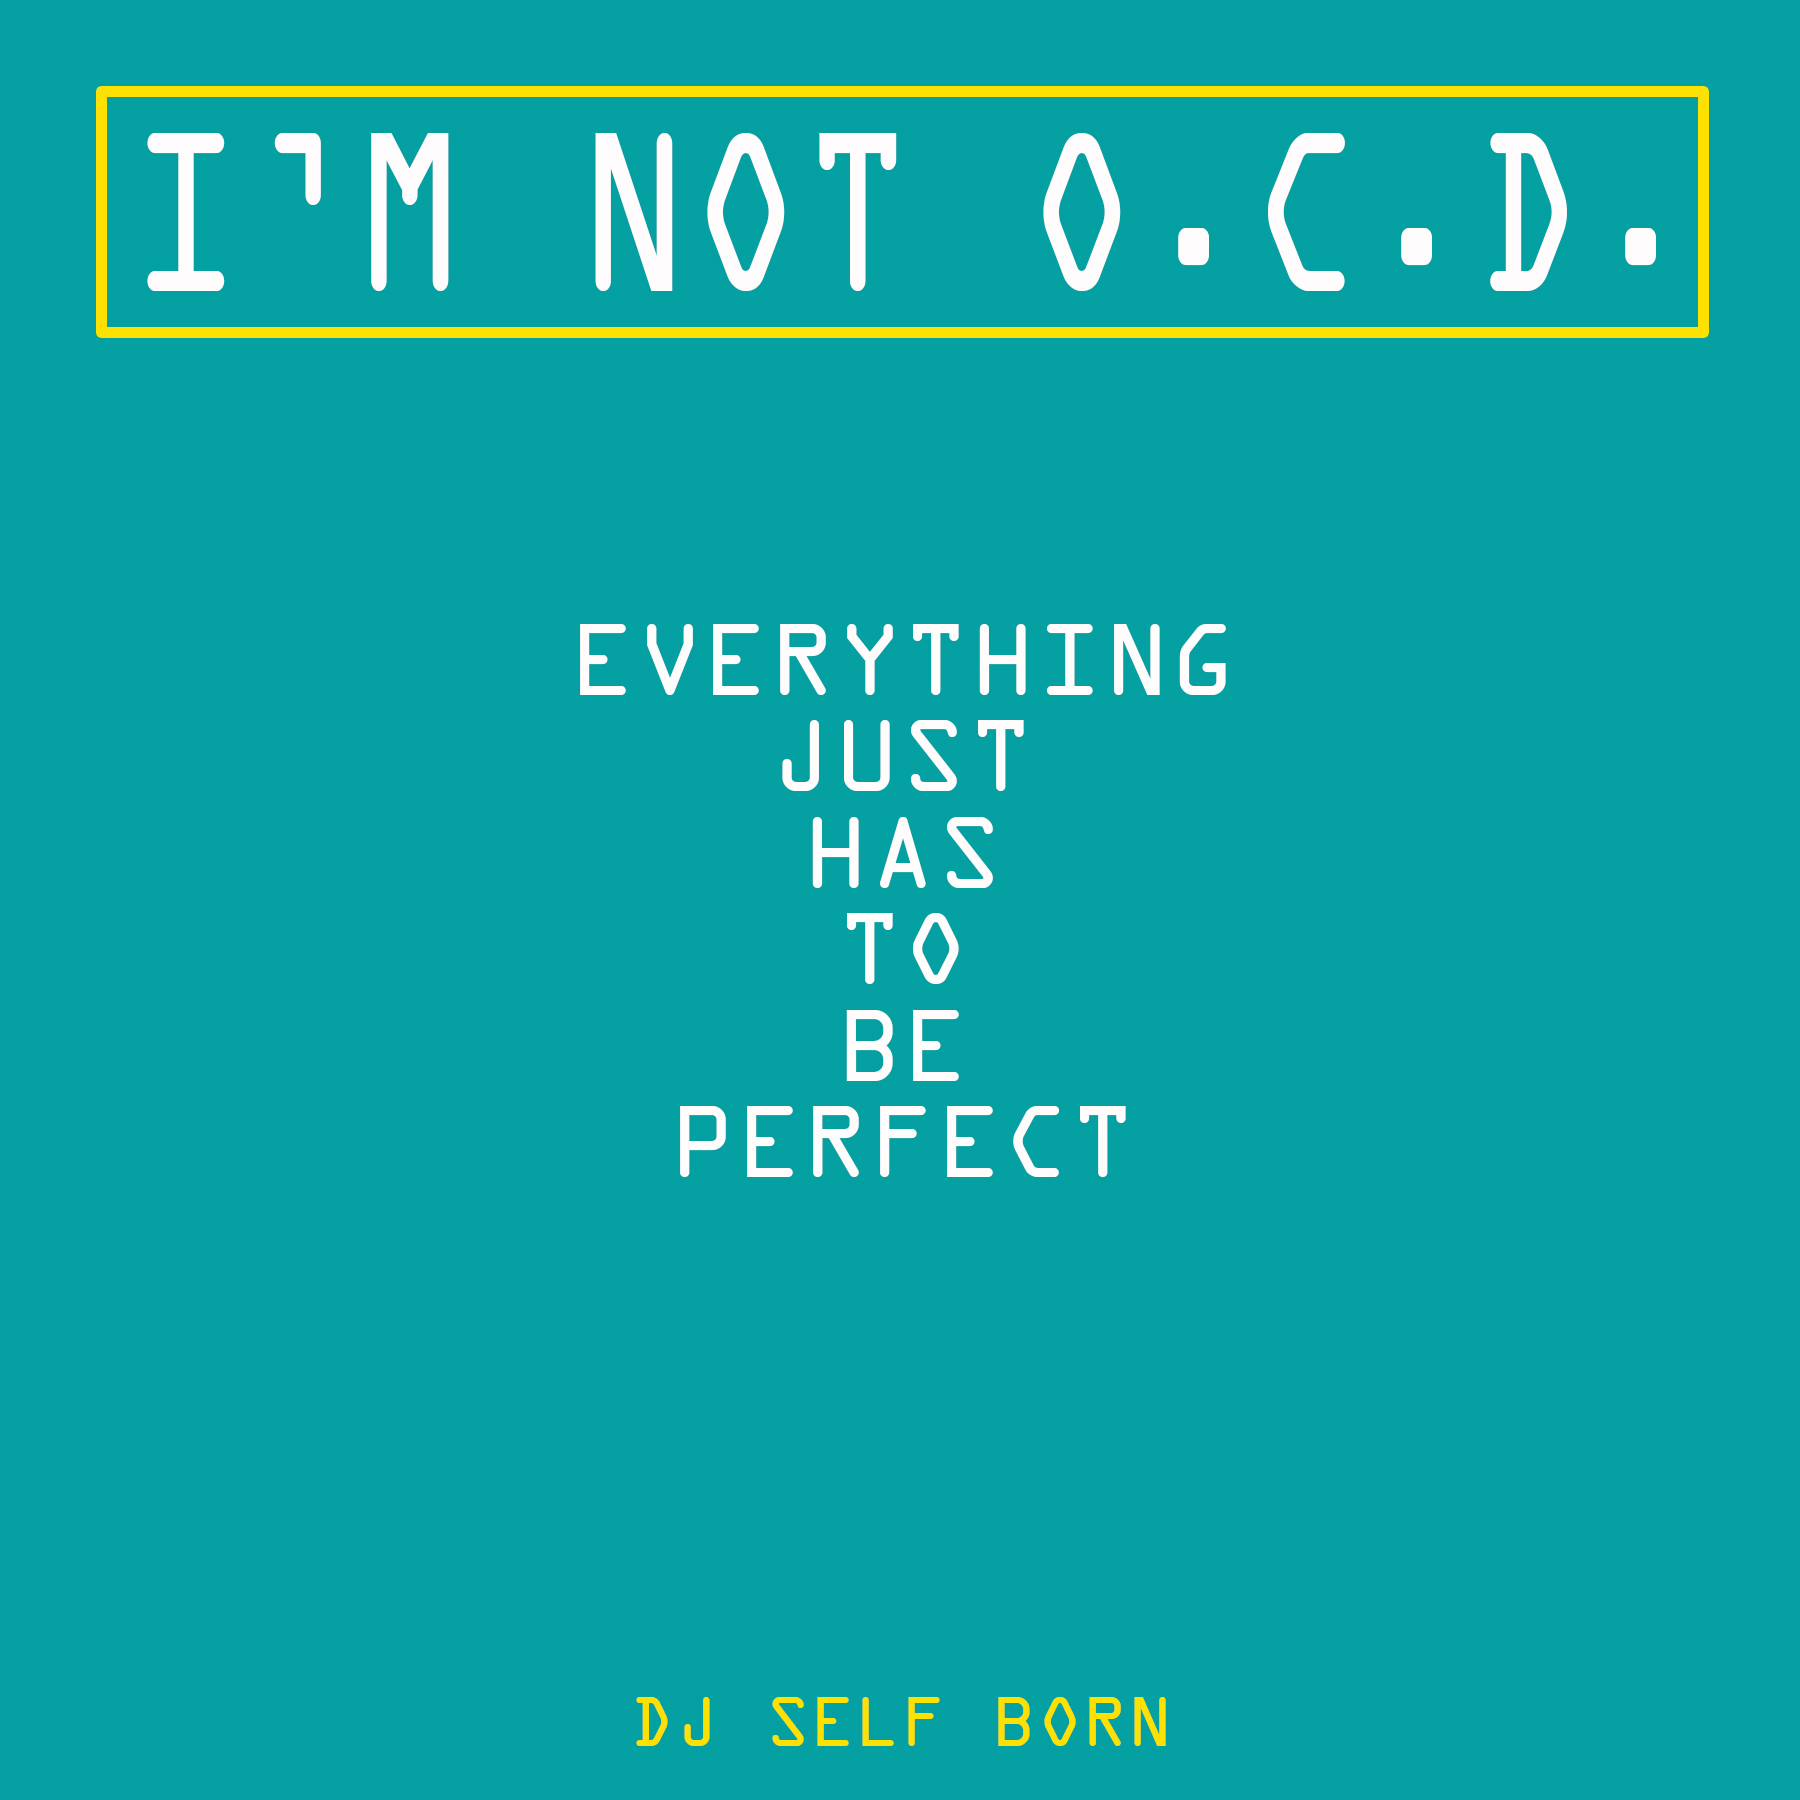 Hip-Hop Premiere: ‘DJ Self Born’ releases his awesome 5th album “I’m Not O.C.D., Everything Just Has To Be Perfect”.